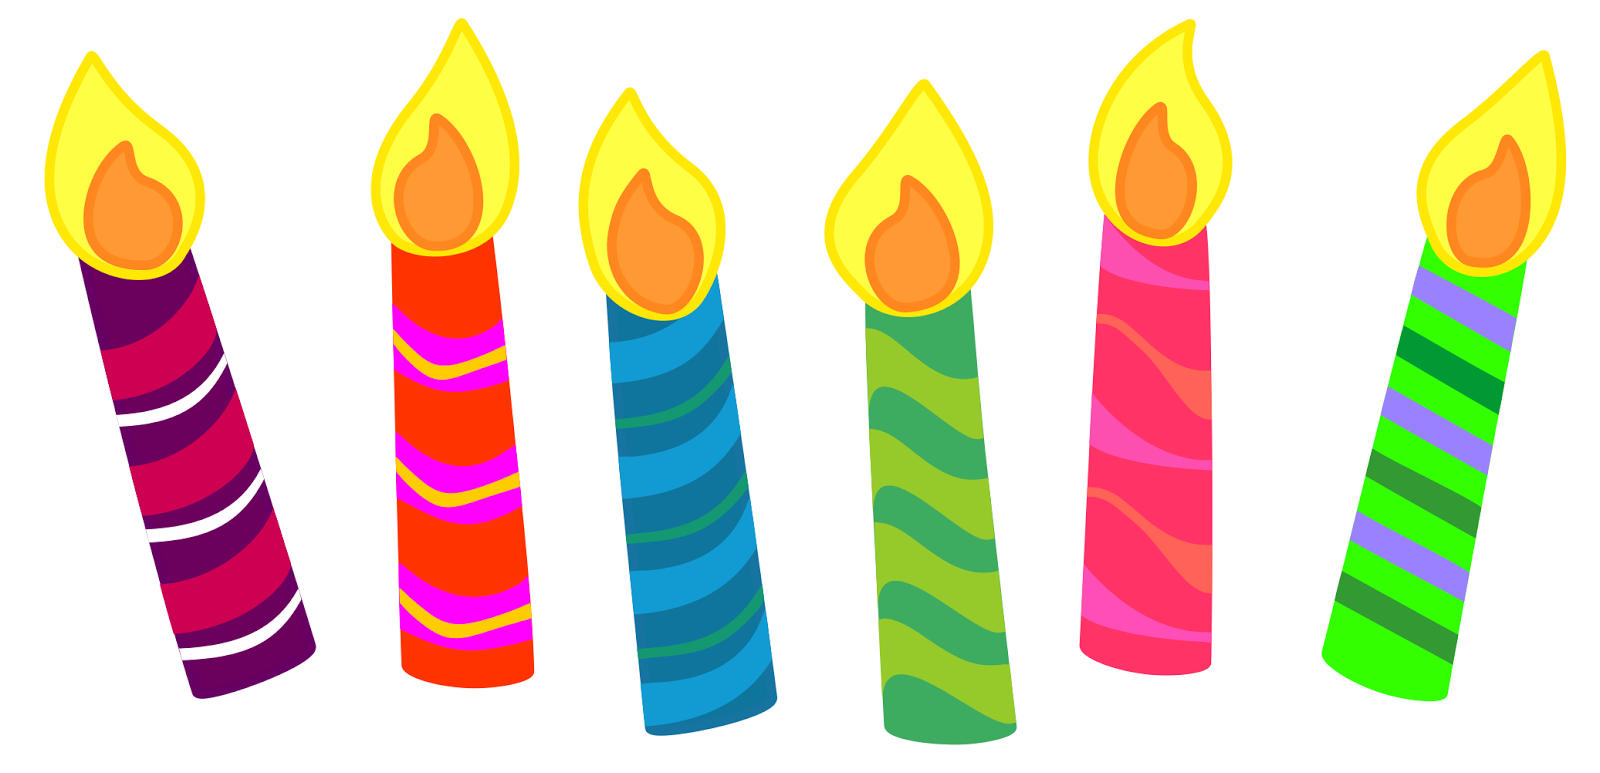 Candles Large Images Hd Image Clipart